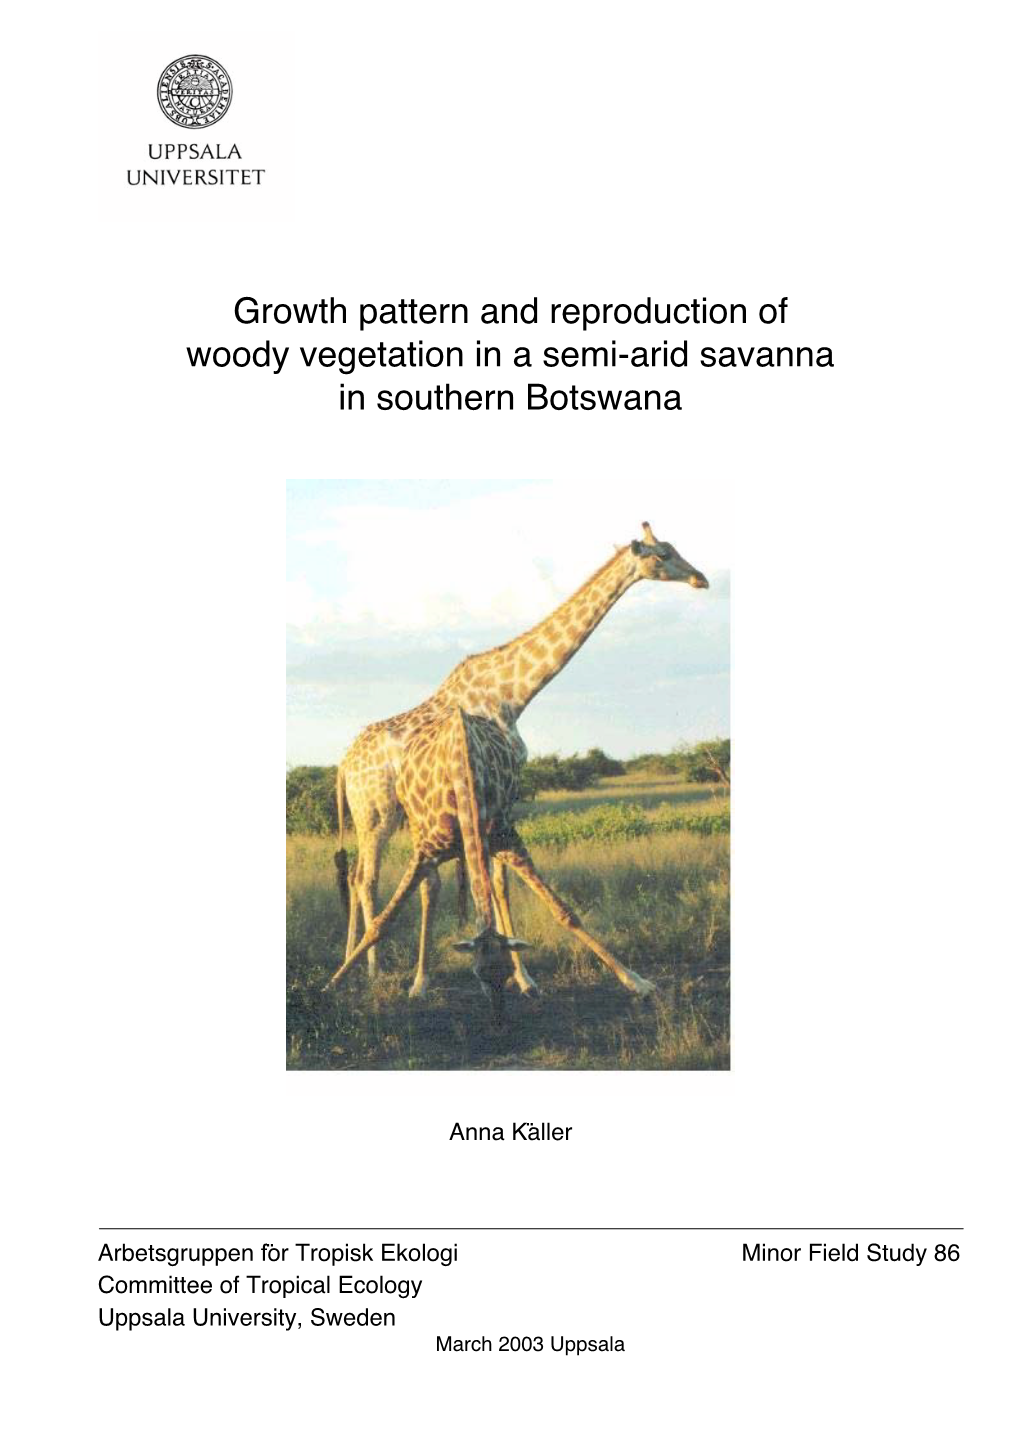 Growth Pattern and Reproduction of Woody Vegetation in a Semi-Arid Savanna in Southern Botswana